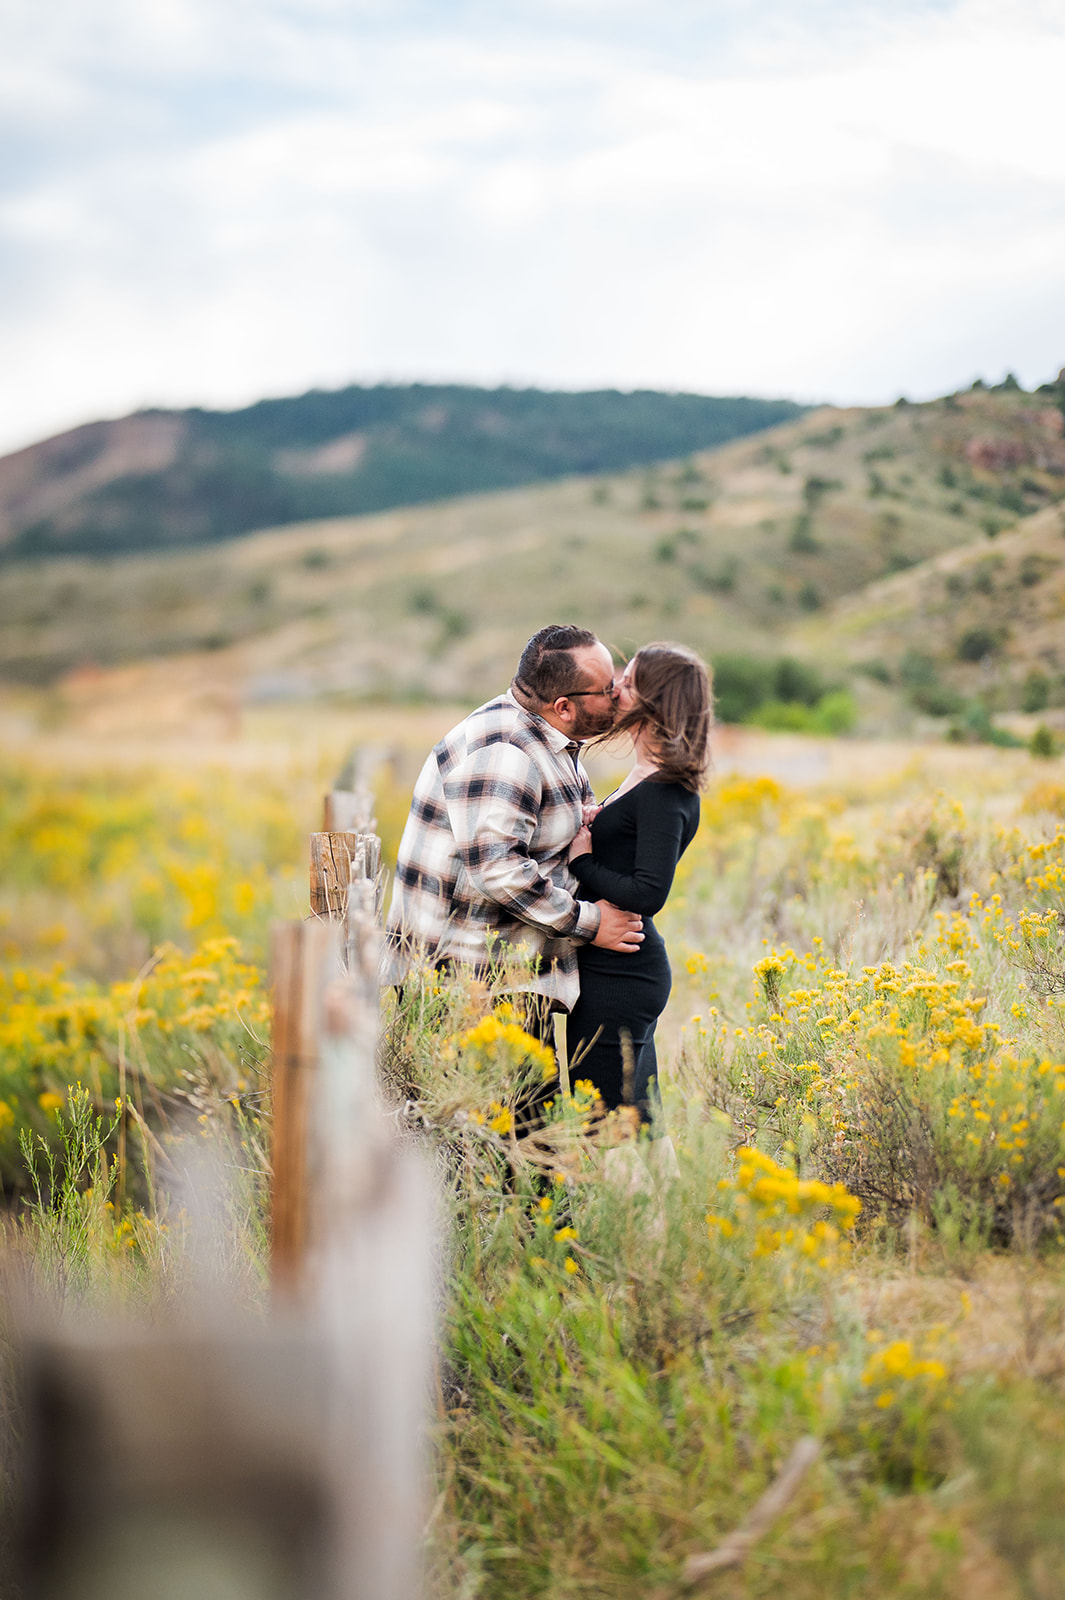 The man and woman lean in for a kiss surrounded by yellow flowers.